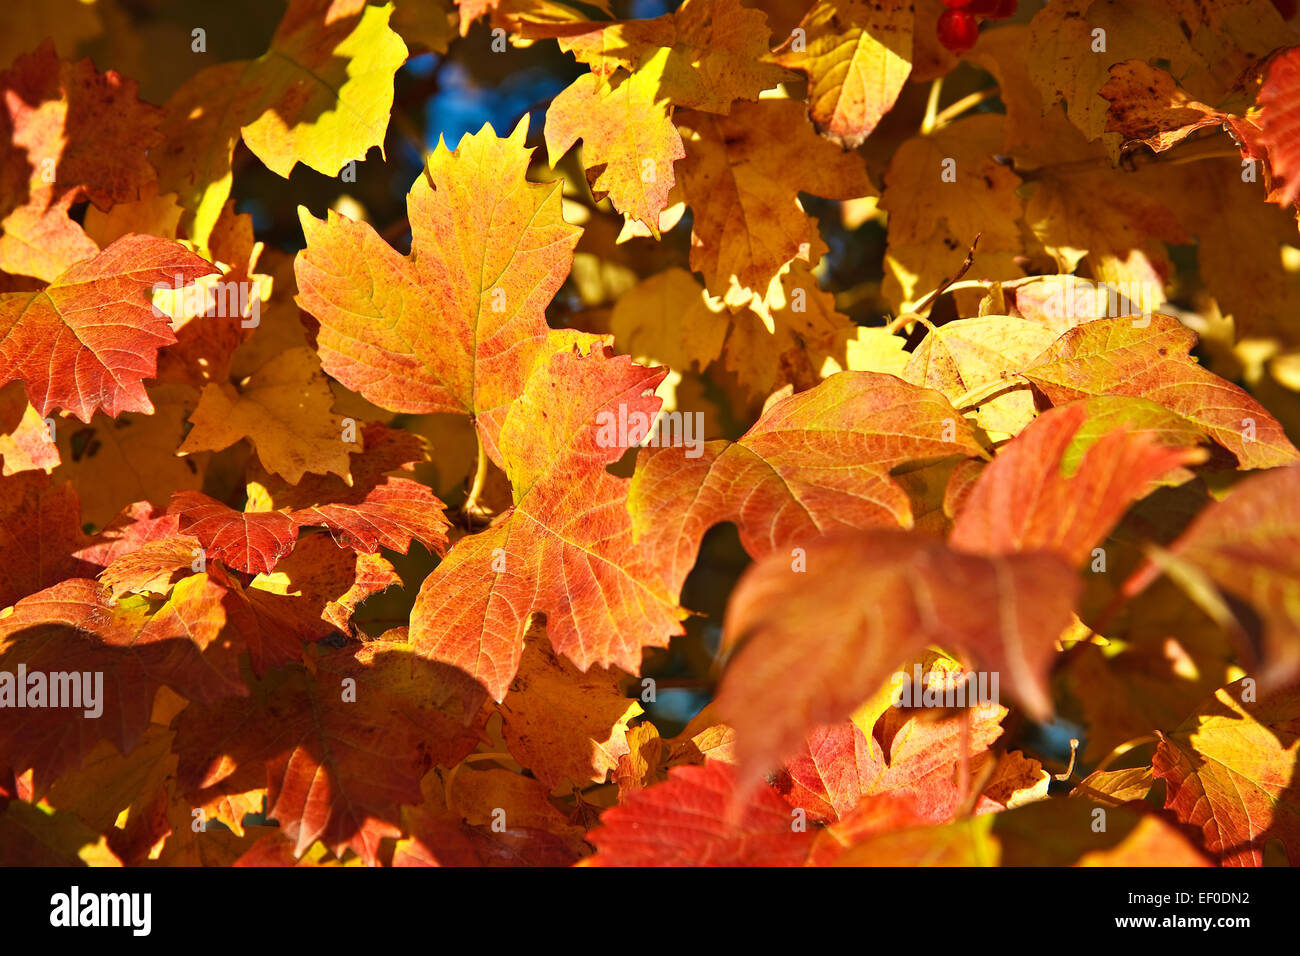 Brightly colored autumn leaves. Stock Photo